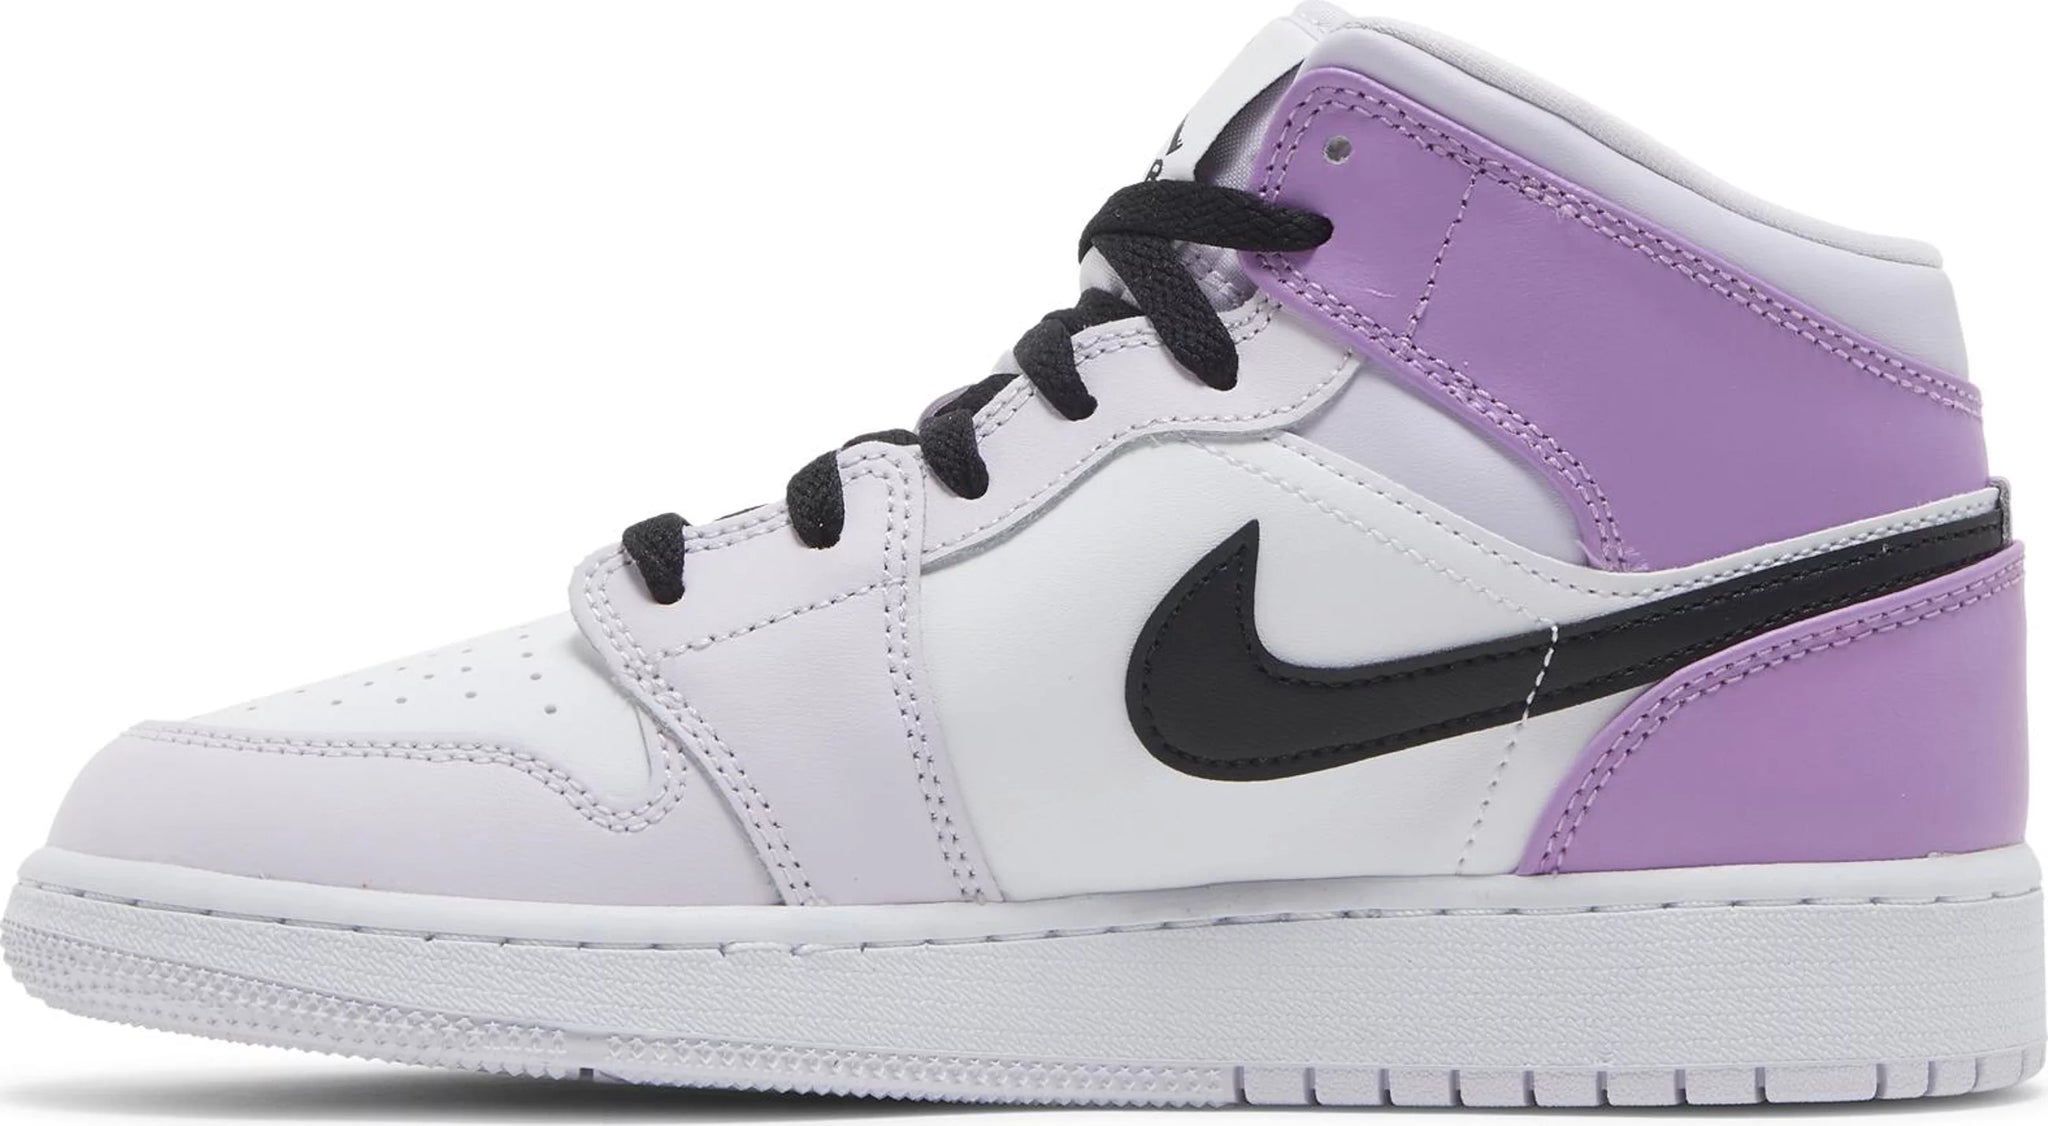 Double Boxed  159.99 Nike Air Jordan 1 Mid Barely Grape Double Boxed